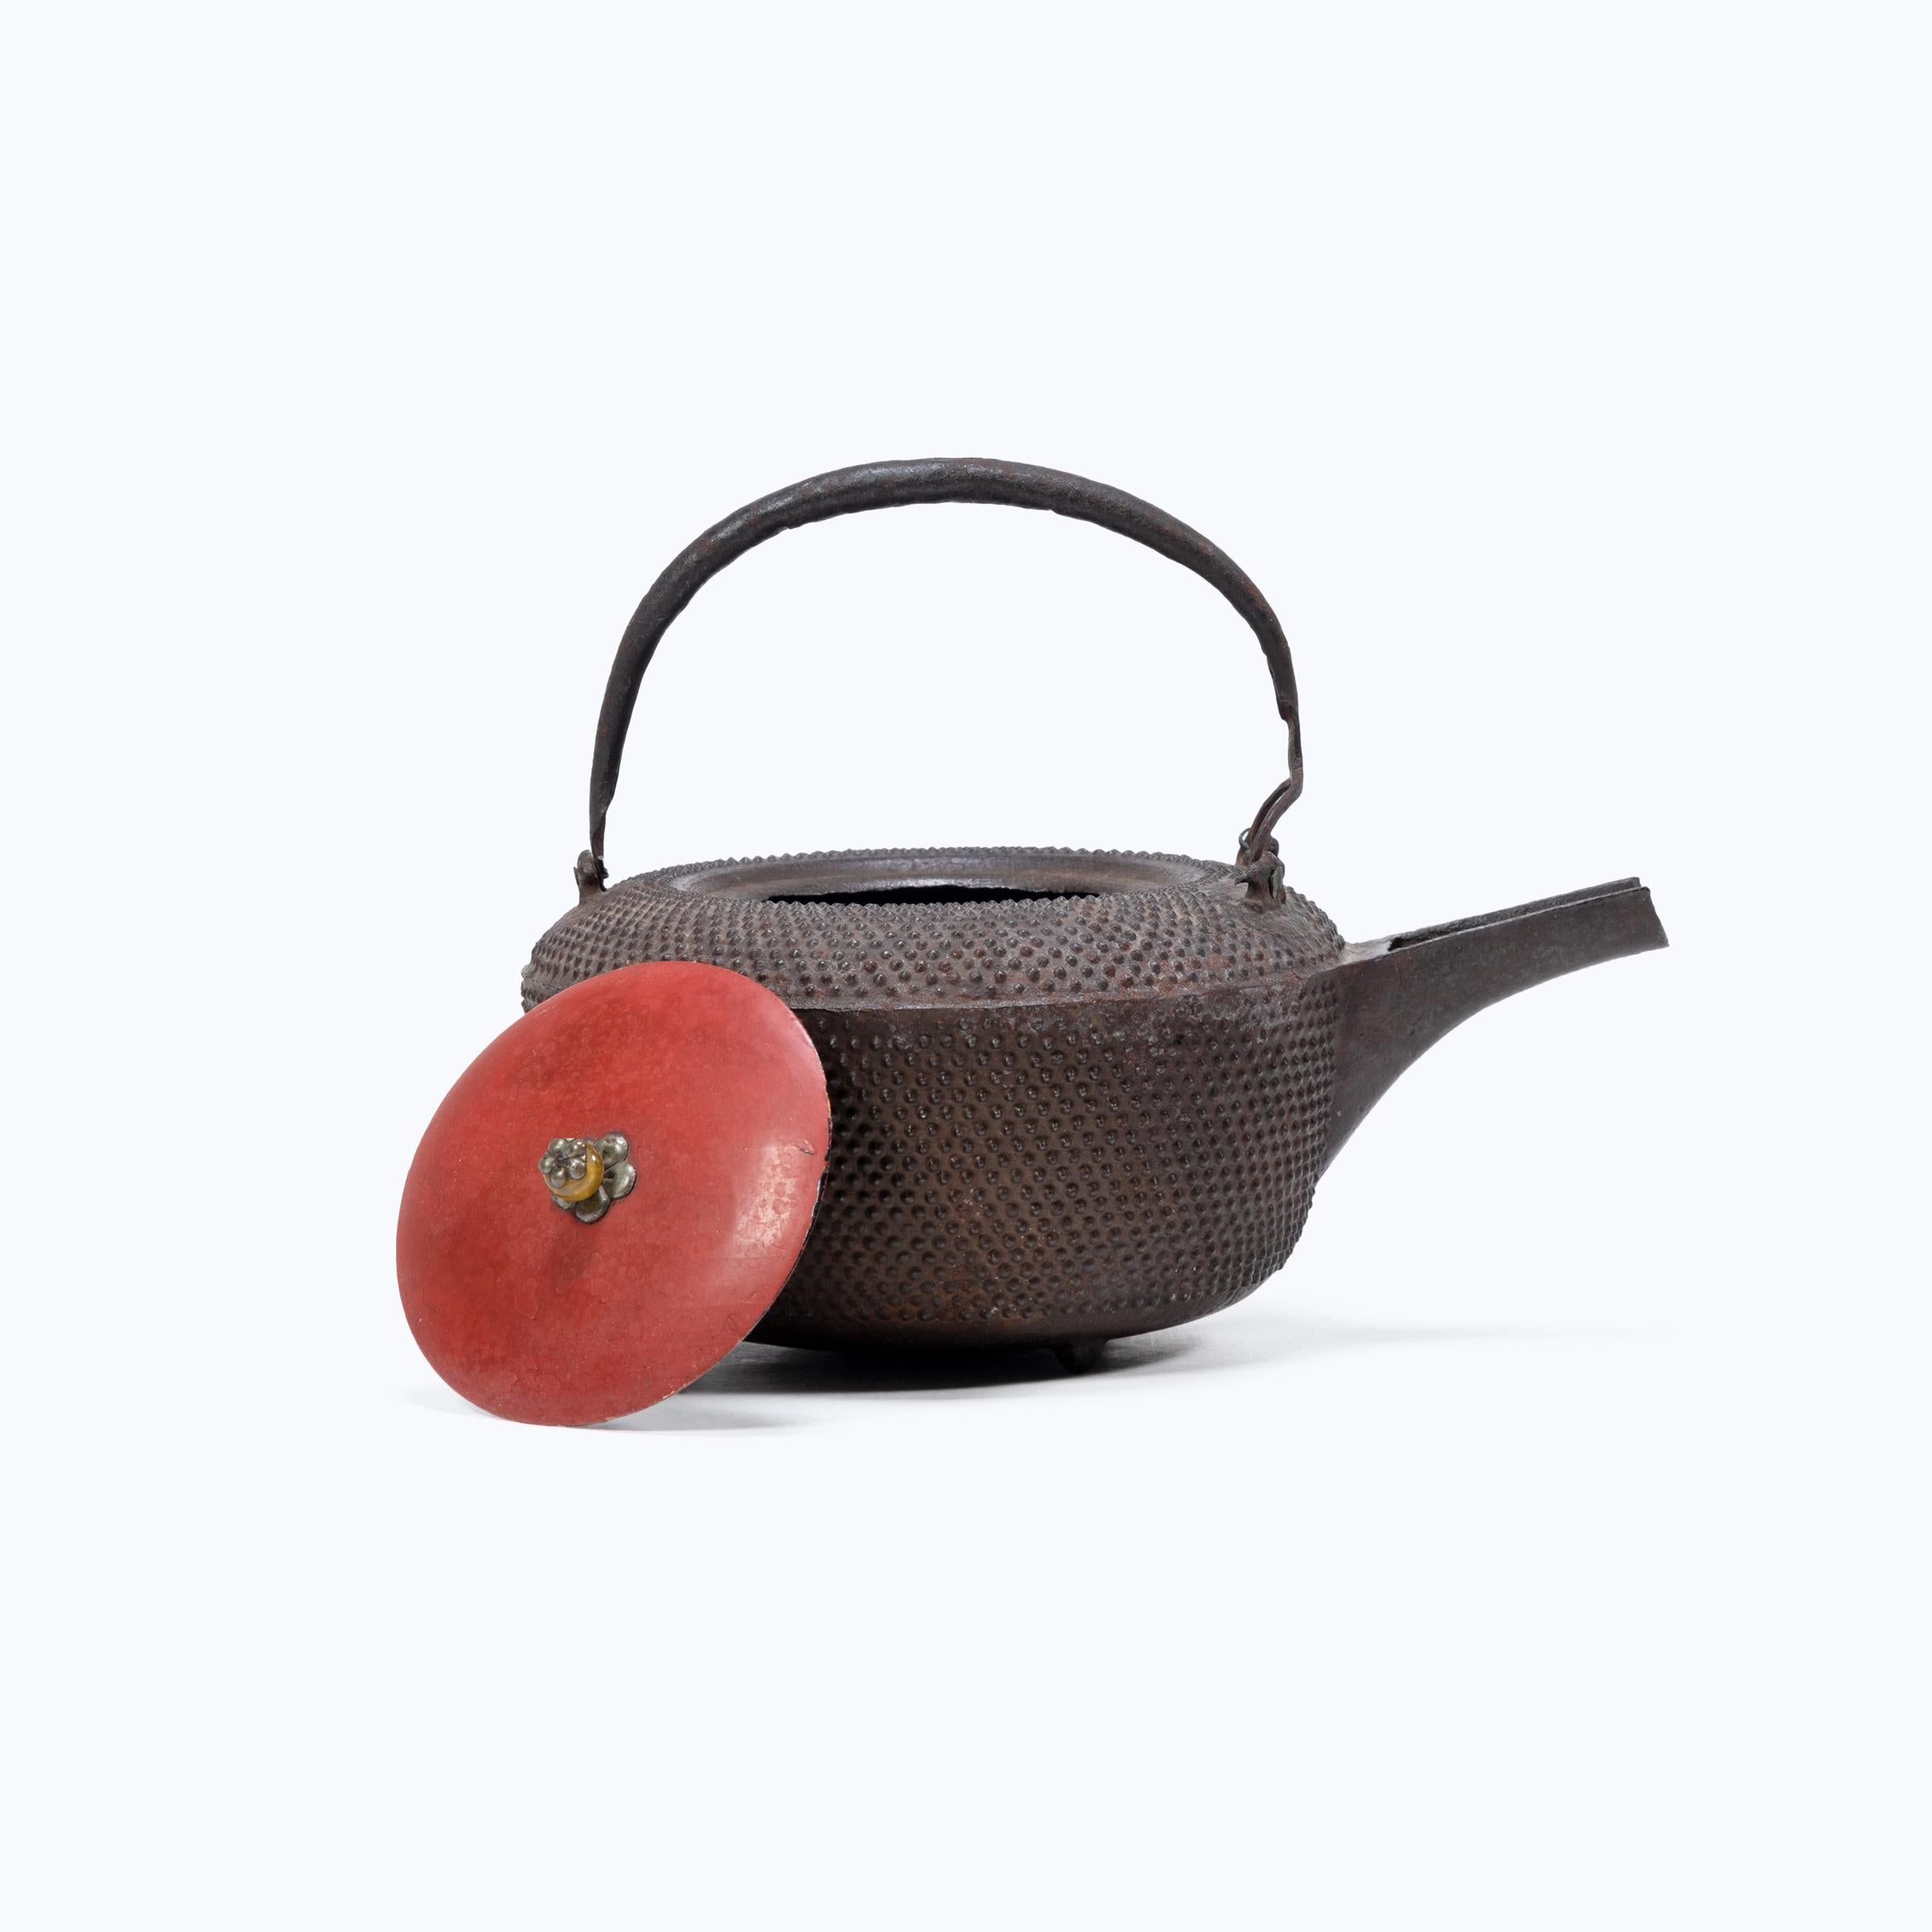 20th Century Japanese Iron Tetsubin with Red Lacquer Lid, c. 1900